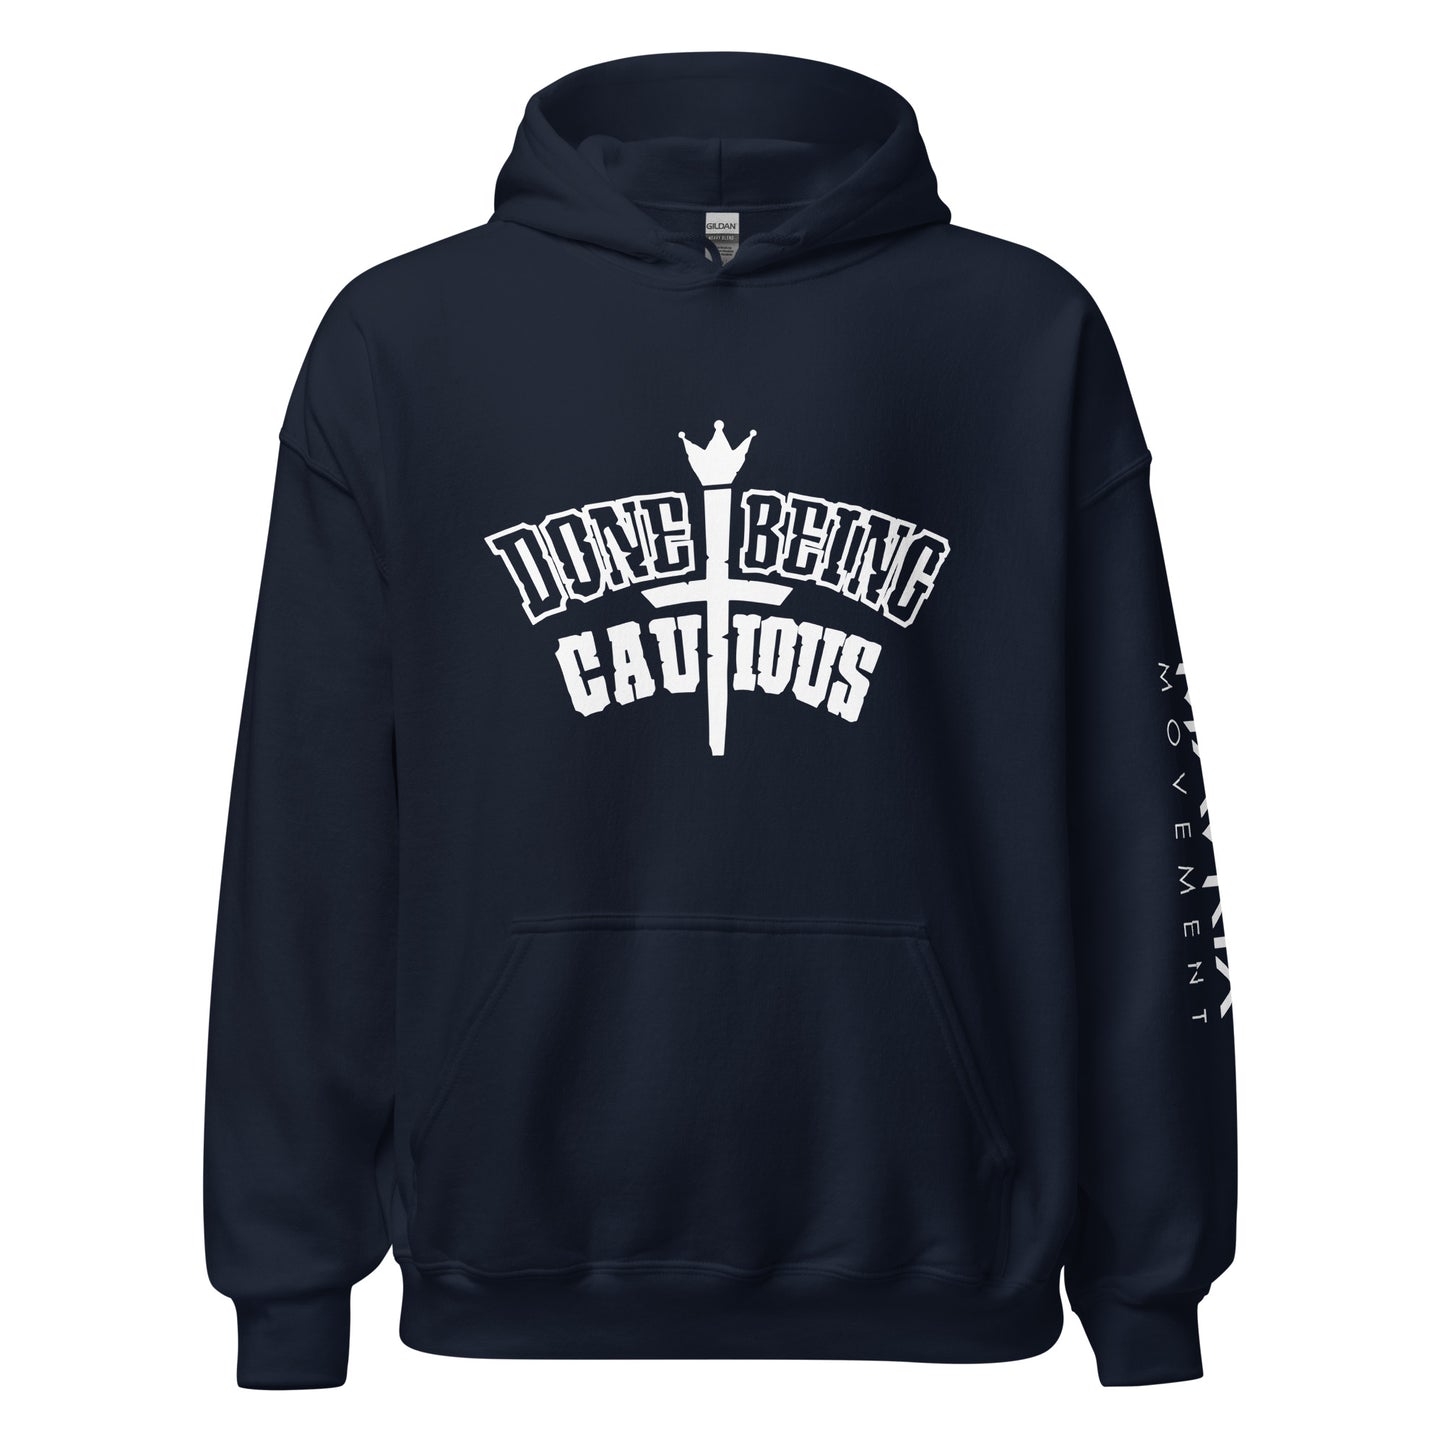 Done Being Cautious Signature Monotone Hoodie (7 colors)